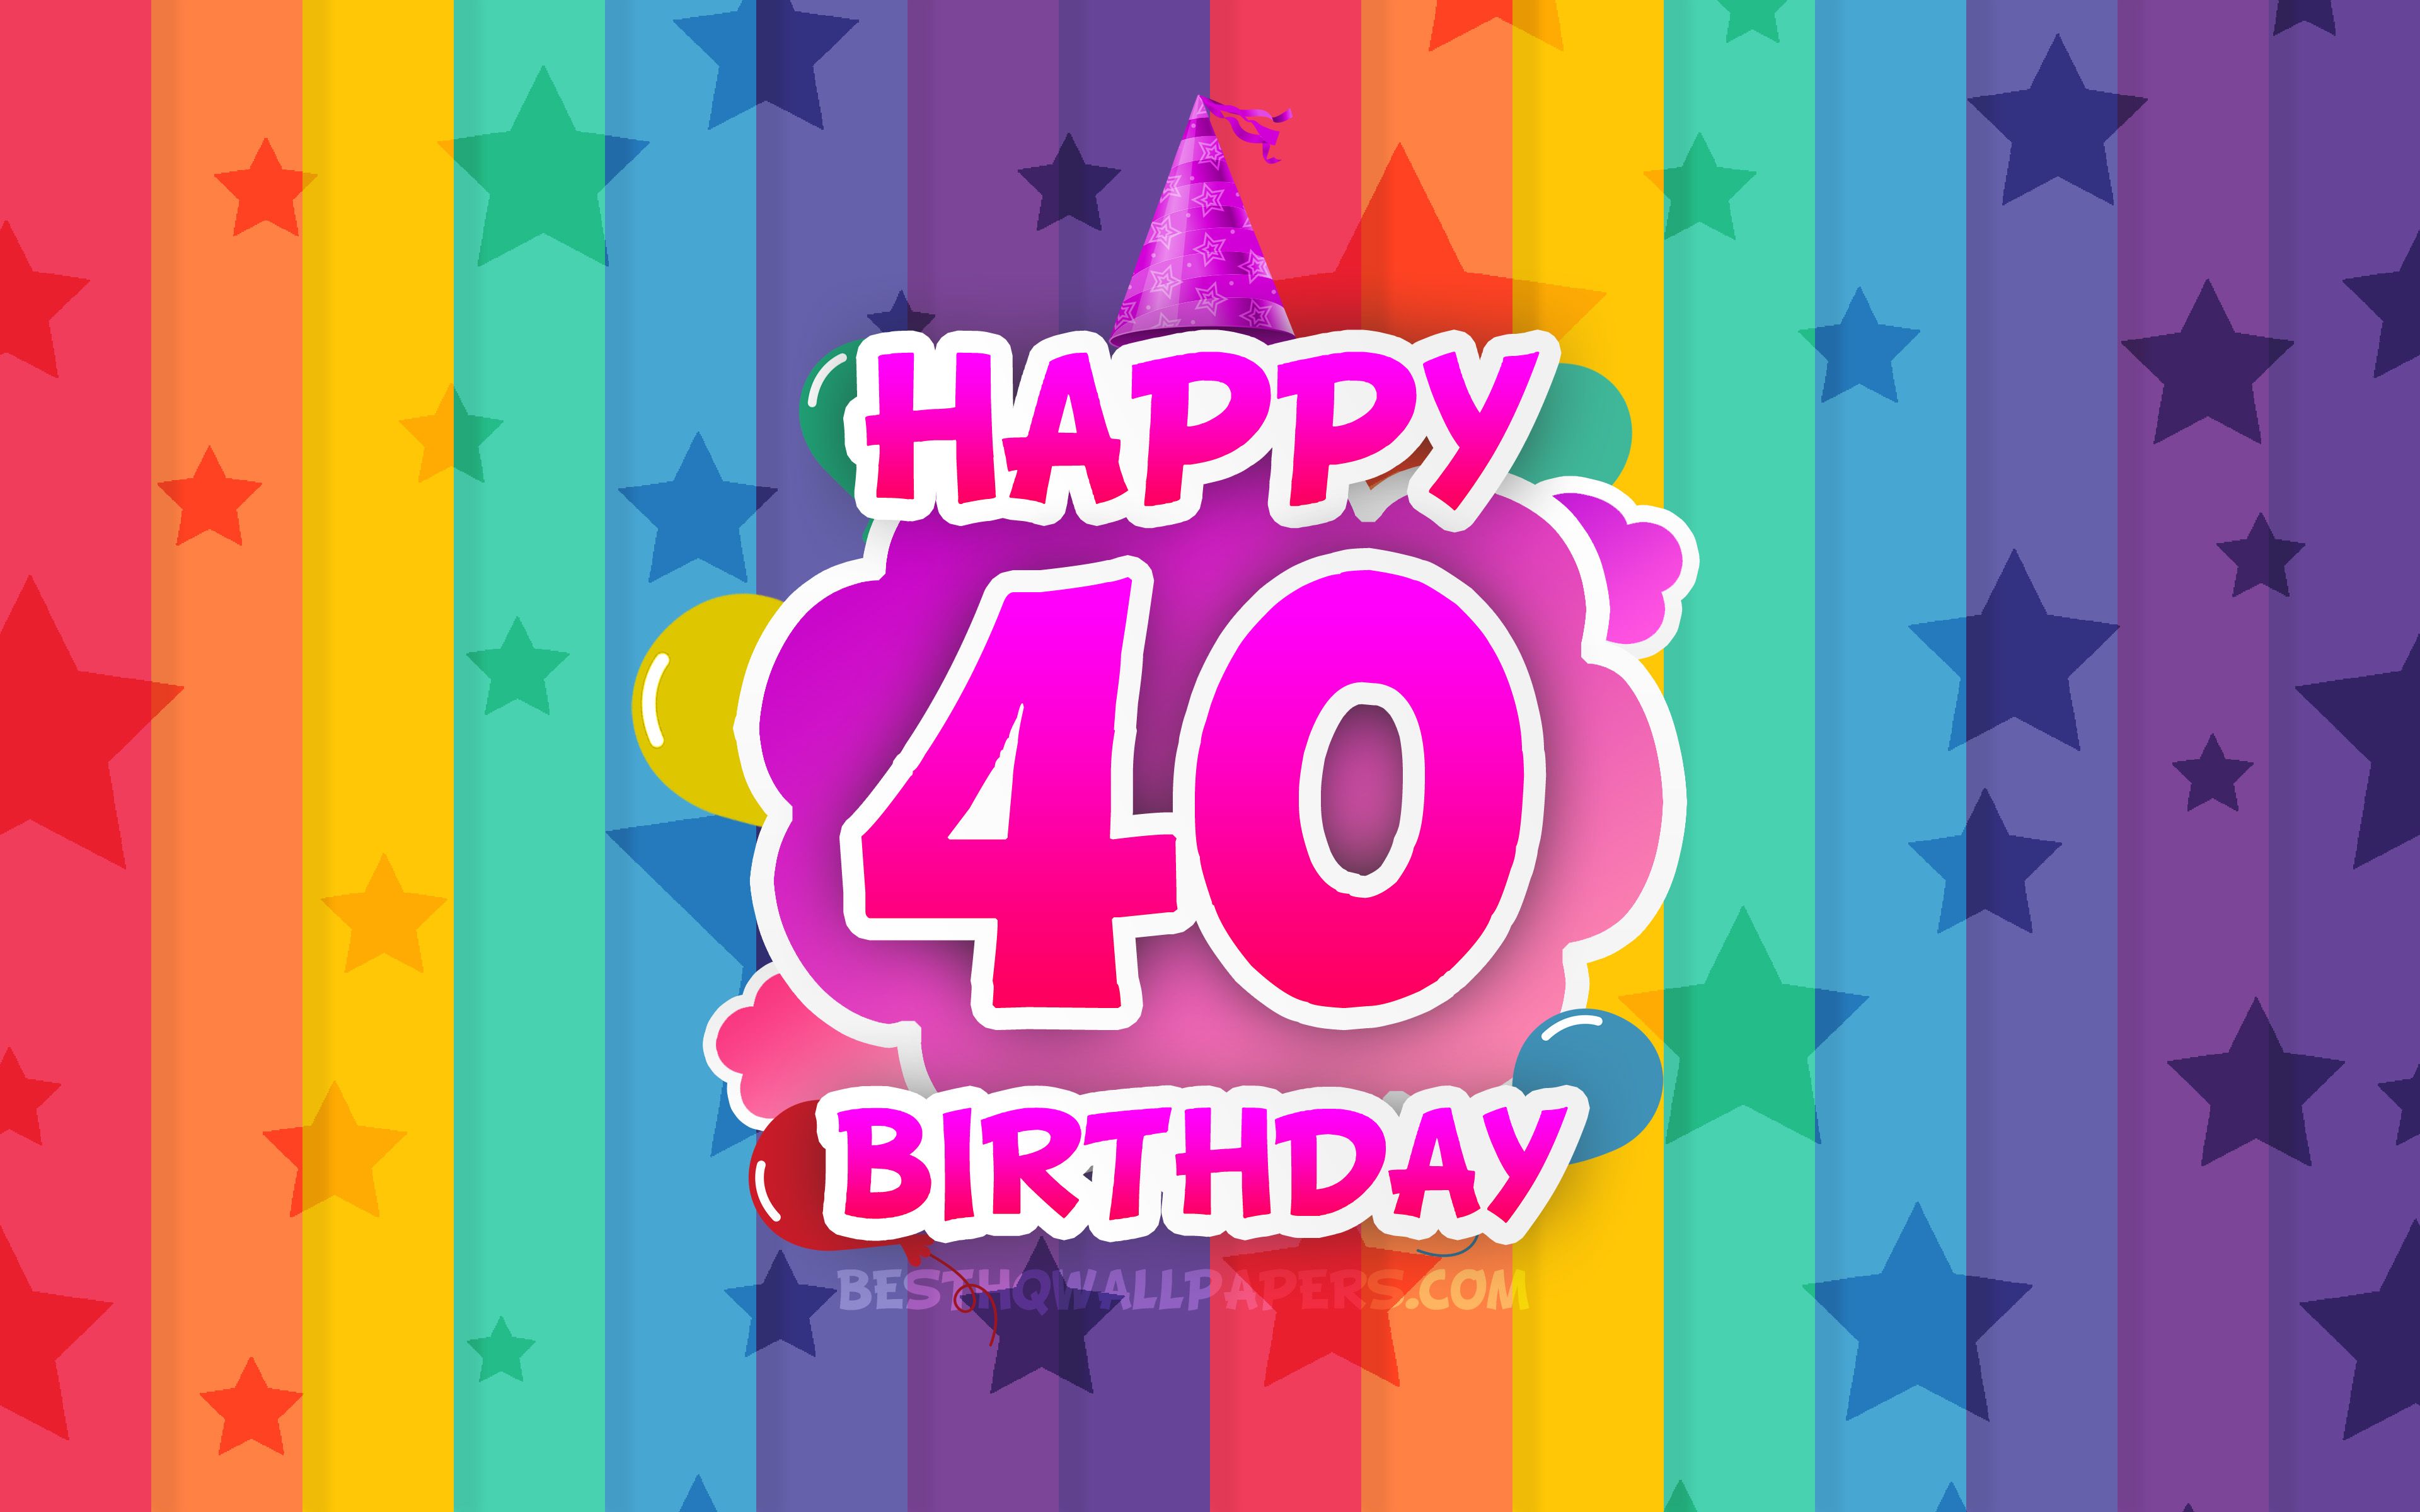 cute birthday wallpaper,birthday,party,birthday party,font,event (#404253)  - WallpaperUse